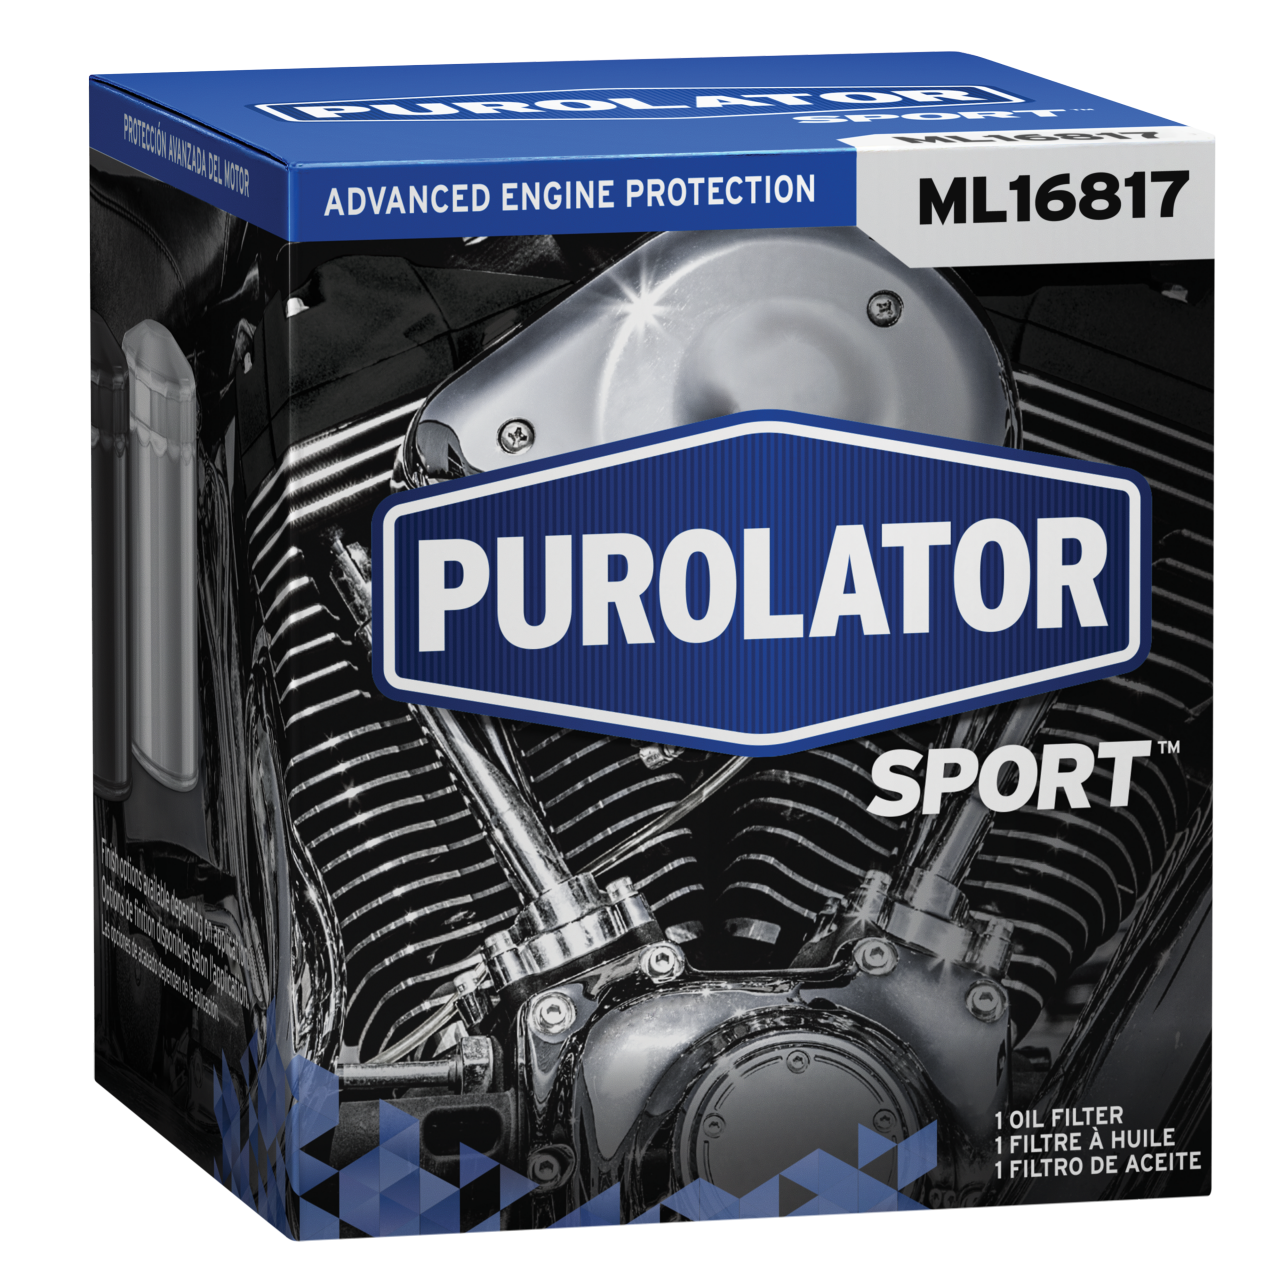 PurolatorSPORT™ Oil Filters provide high dirt removal and engine protection for motorcycles, ATVs, snowmobiles and recreational watercraft.